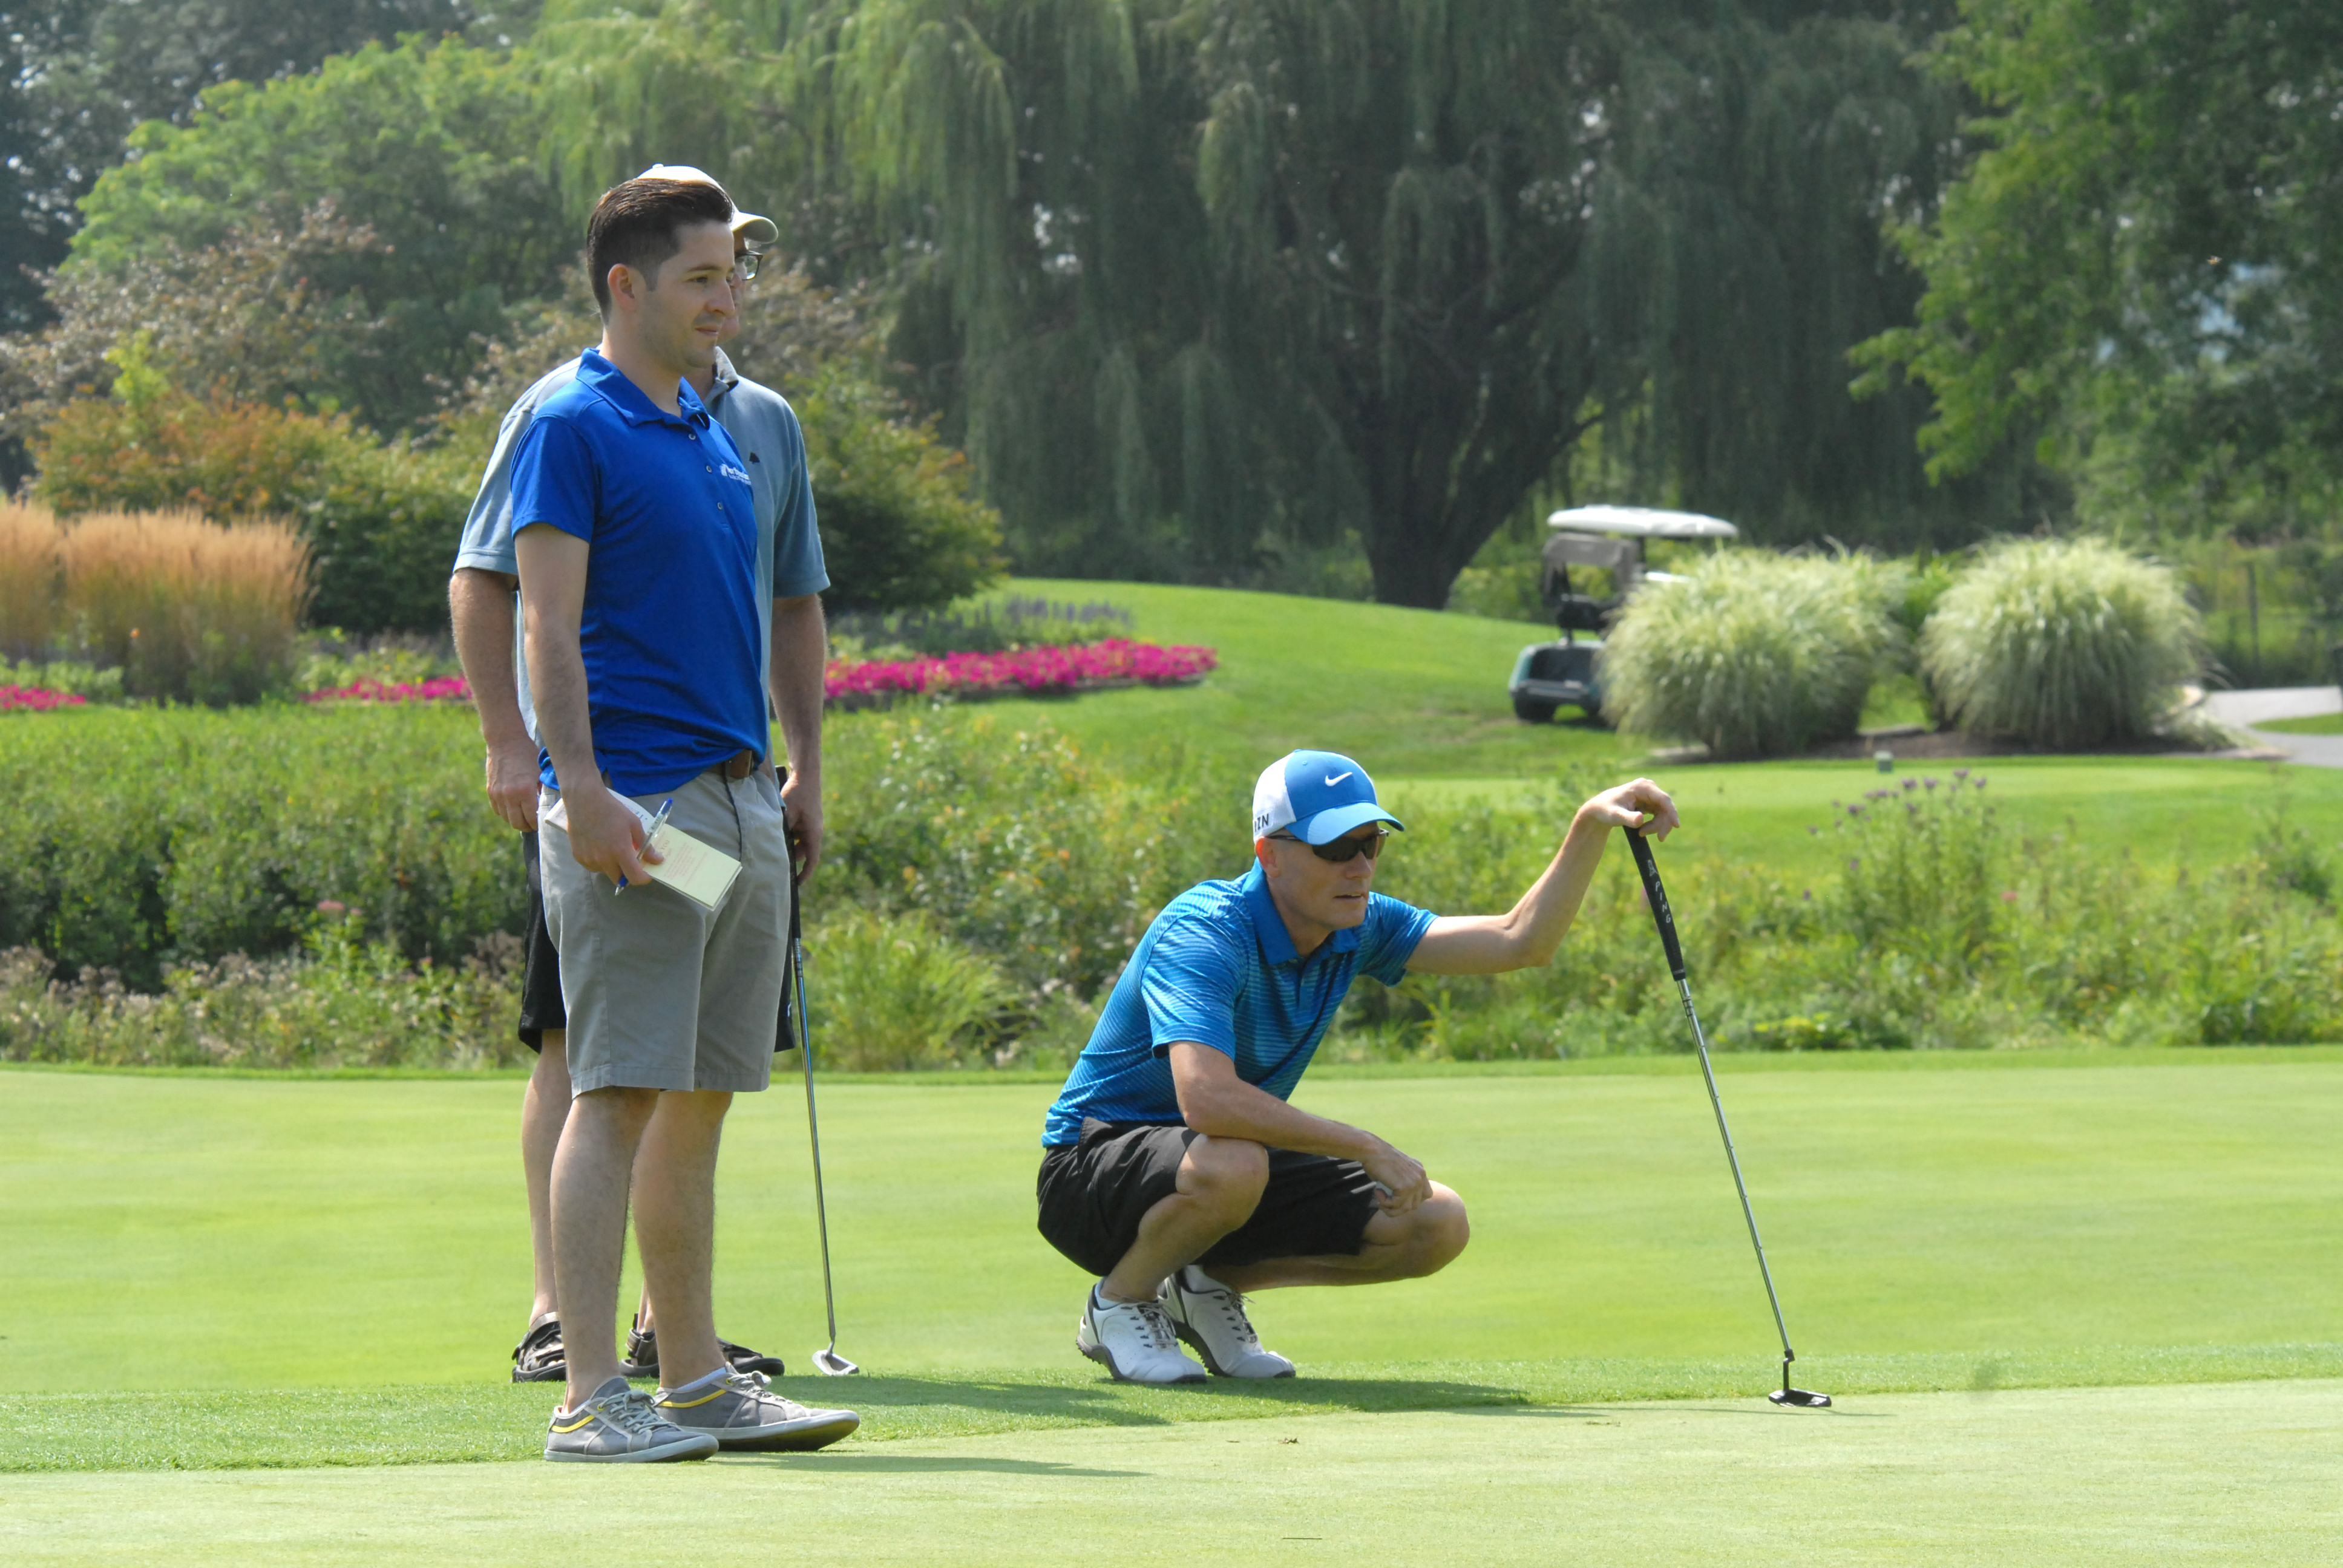 John G. Findley lines up a putt at the Chuck Kane Scholarship Golf Event on Aug. 18, 2014.